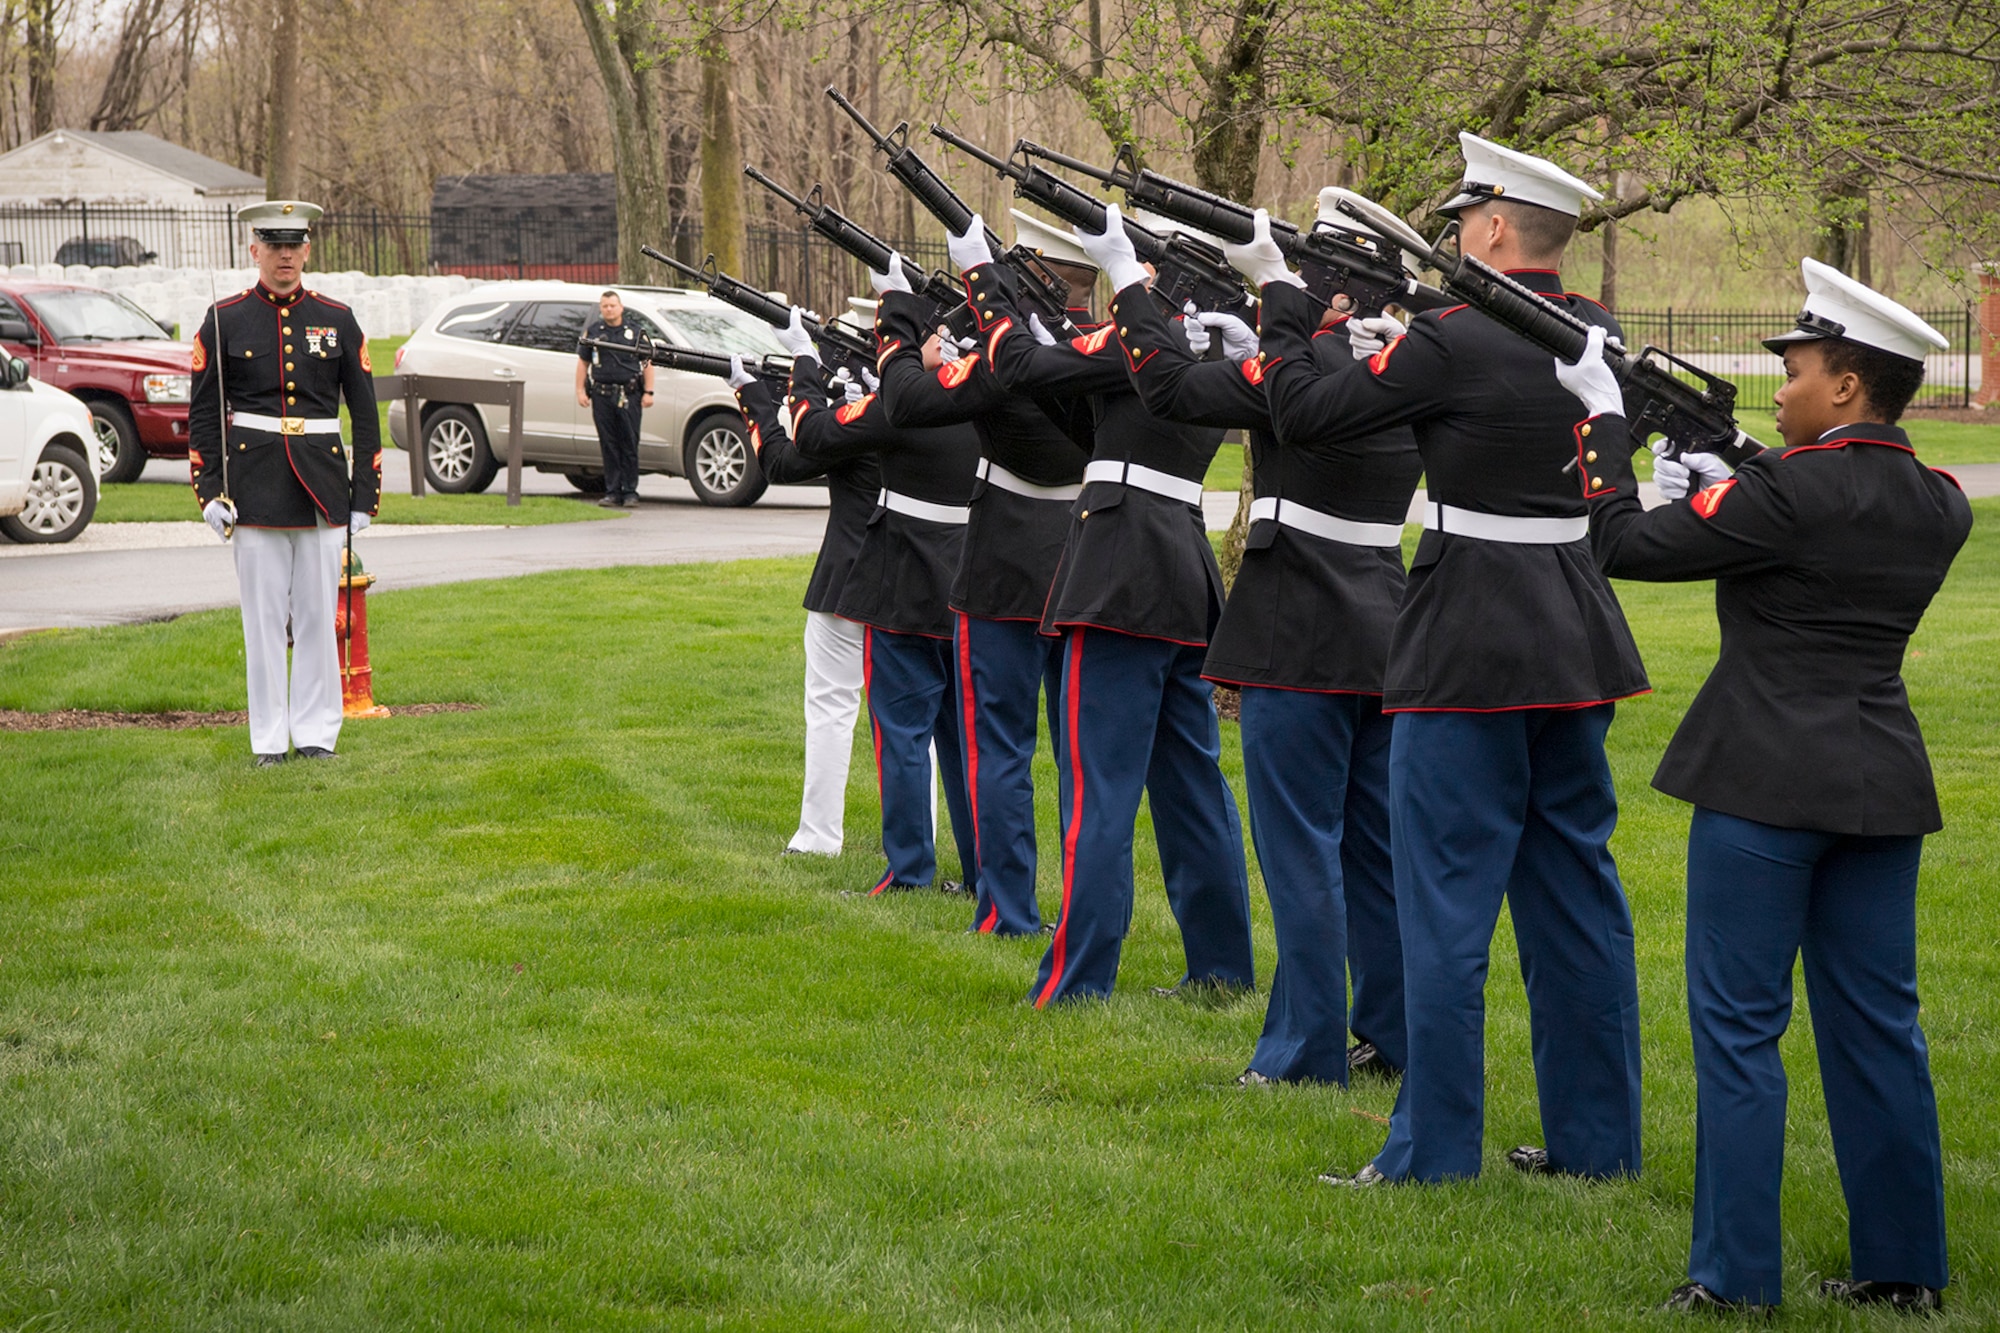 Marines from Detachment 1, Communications Company, Combat Logistics Regiment 45, 4th Marine Logistics Group, perform a 21-gun salute during a funeral for Pvt. Fred Freet April 18, 2019 at the Marion Indiana National Cemetery. Freet was posthumously issued the Purple Heart for wounds received in action resulting in his death, the Combat Action Ribbon for service during World War II and The Presidential unit citation amongst others. (U.S. Air Force Photo/Master Sgt. Ben Mota)